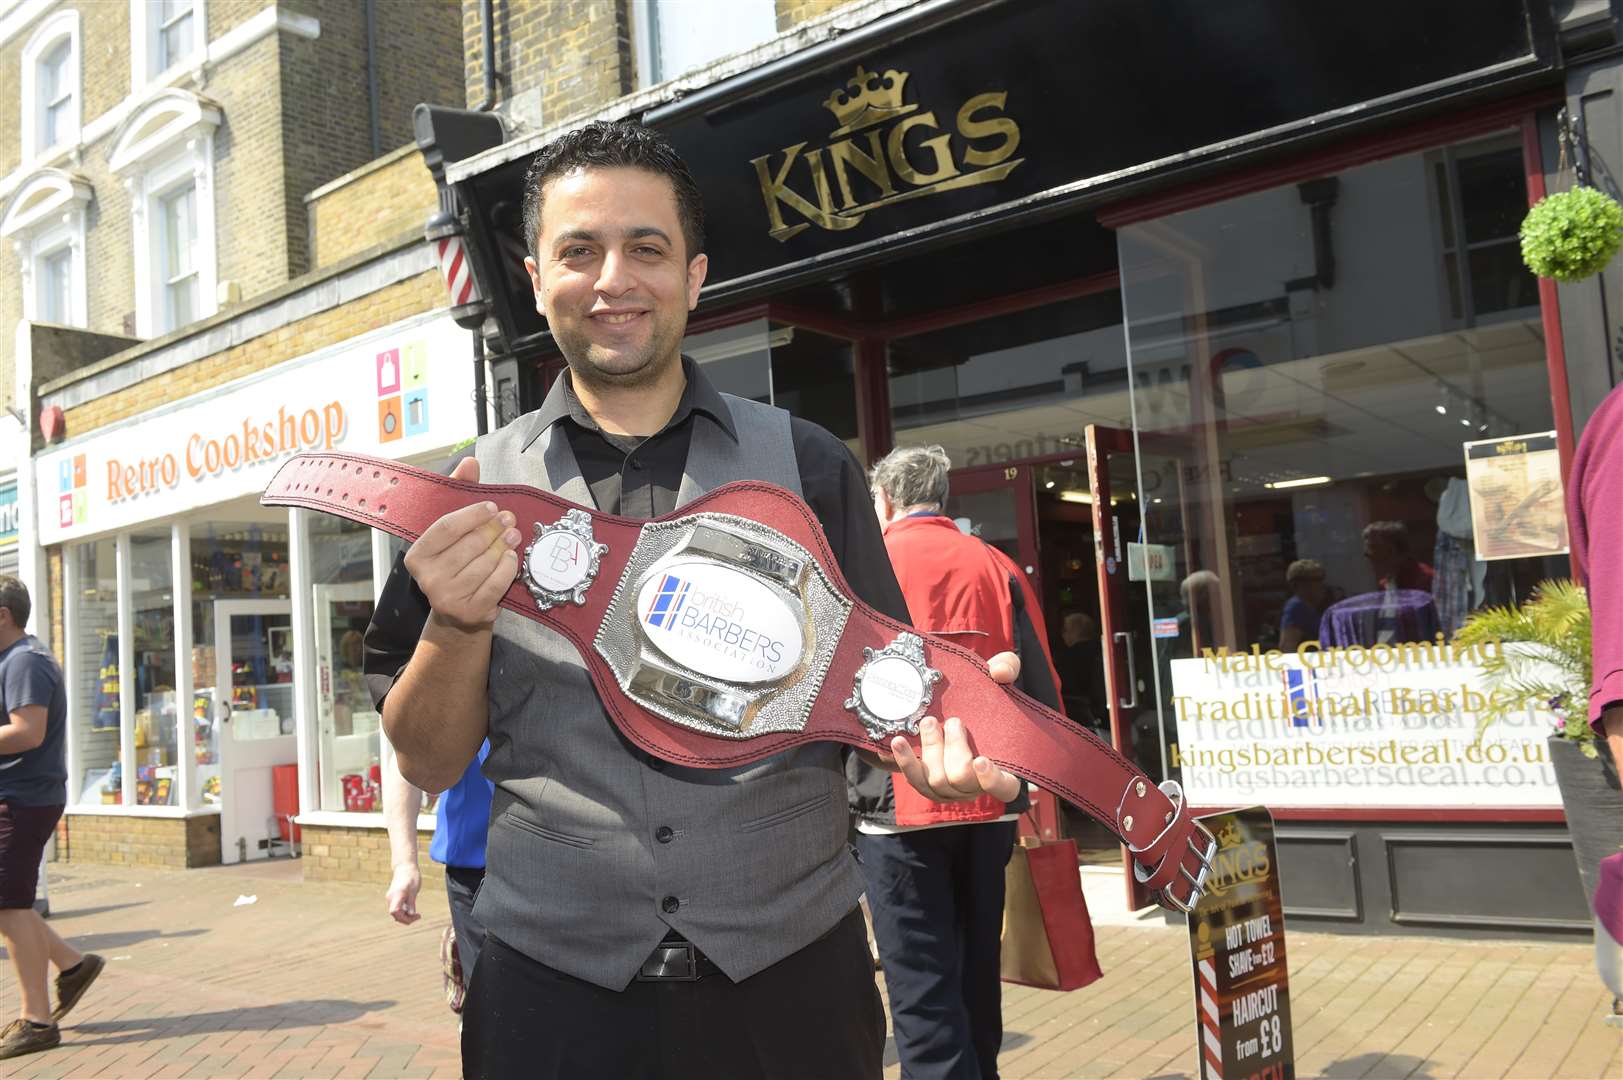 Efe outside his shop in Deal